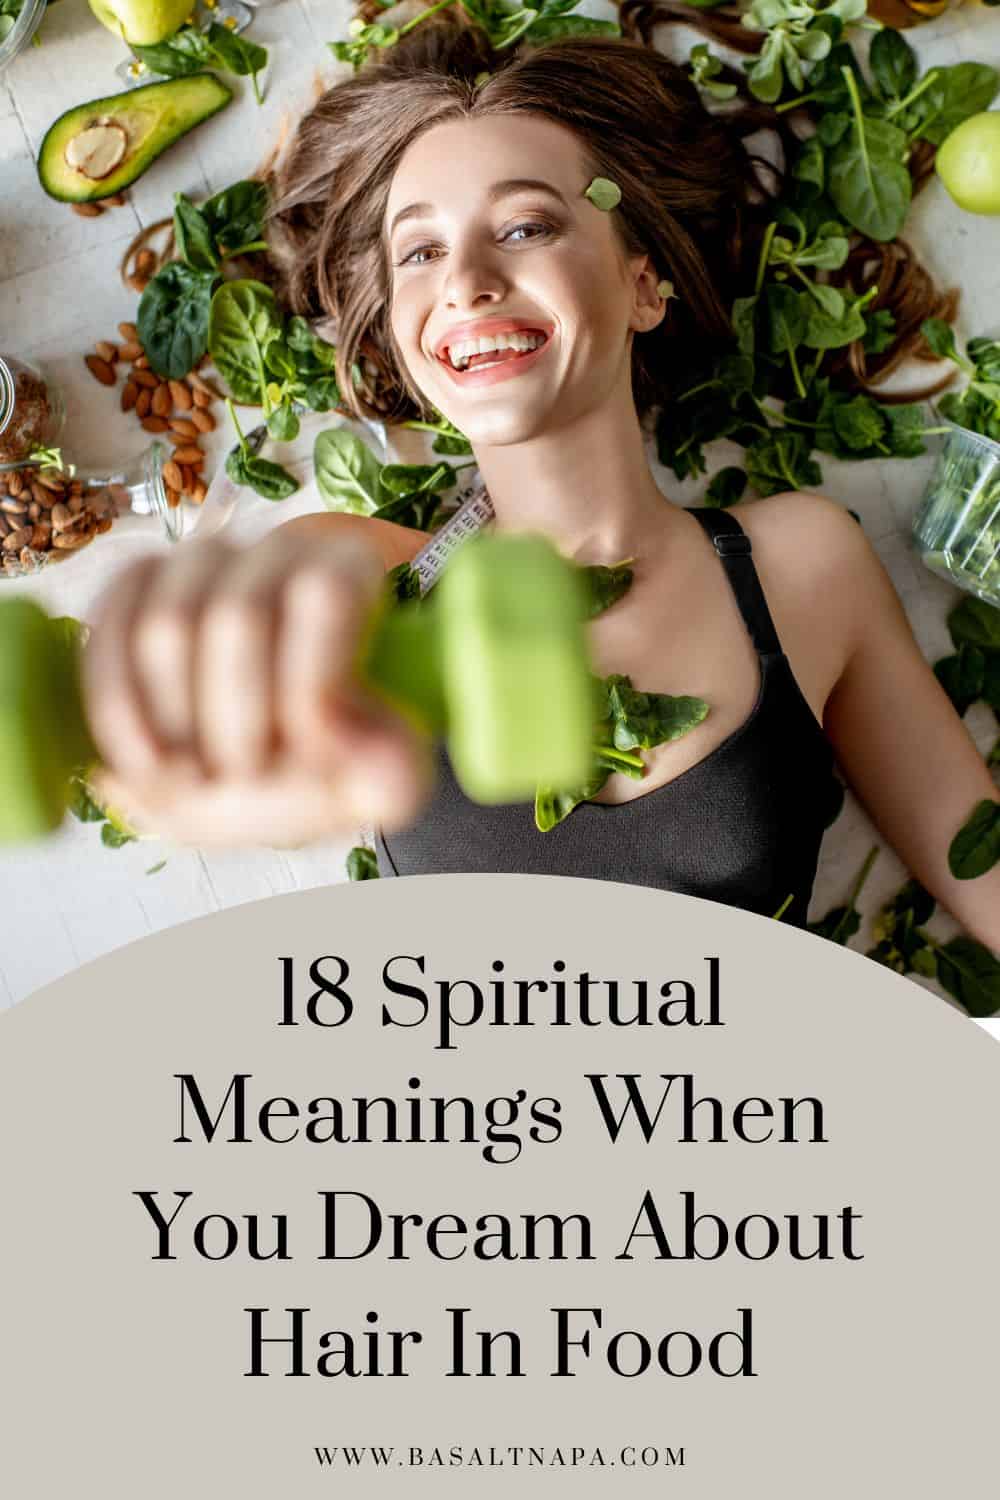 18 Spiritual Meanings When You Dream About Hair In Food